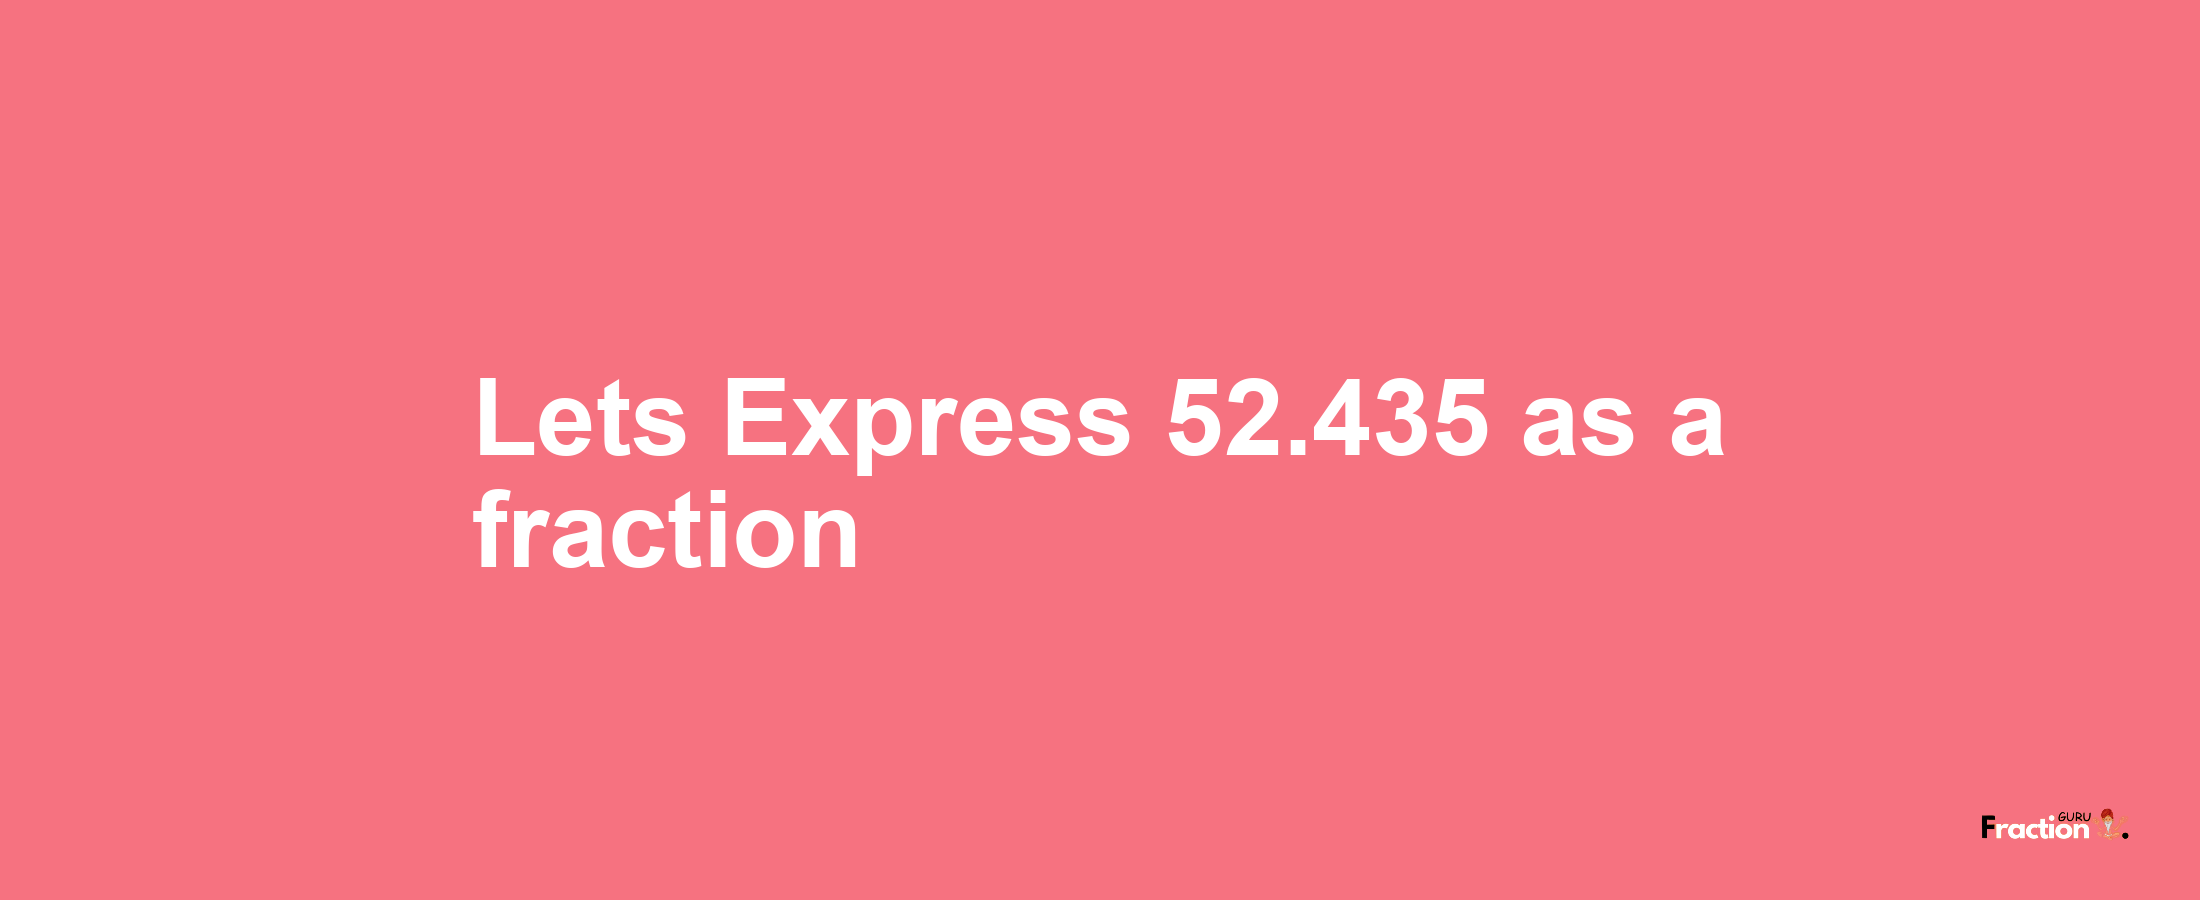 Lets Express 52.435 as afraction